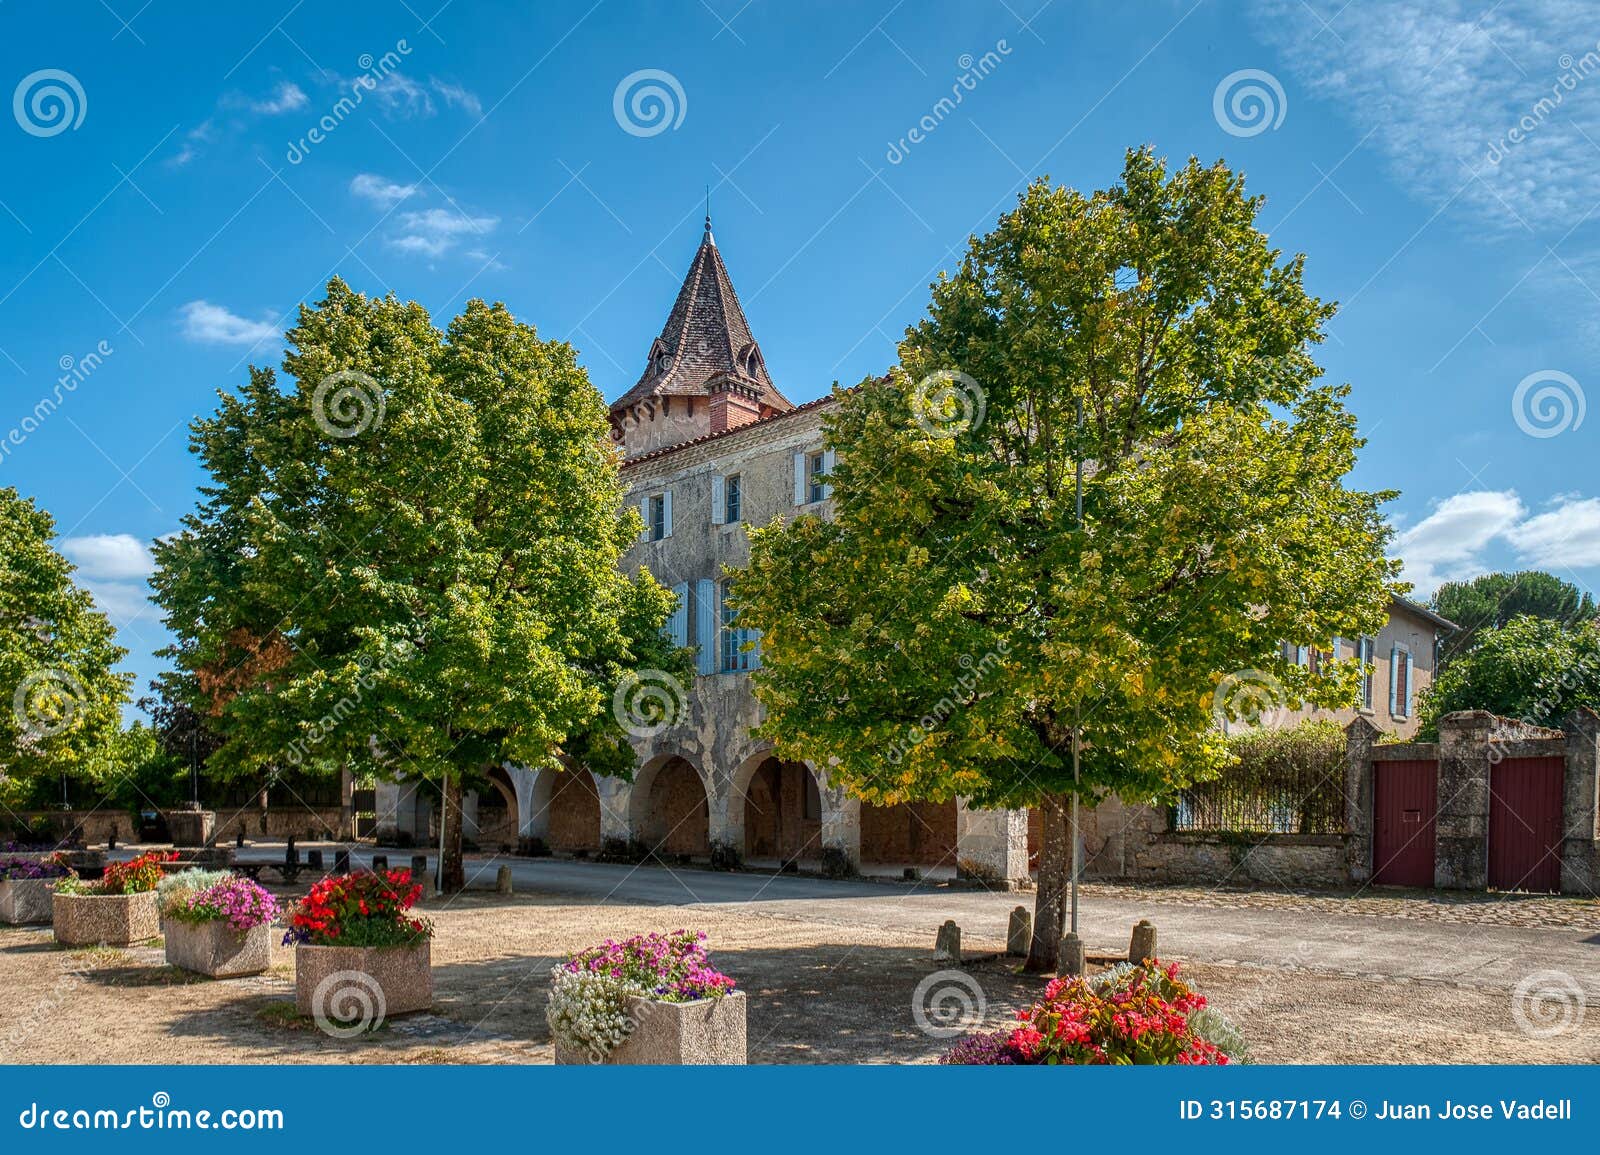 saint-justin is a town and commune in france, located in the aquitaine region, landes department, in the district of mont-de-